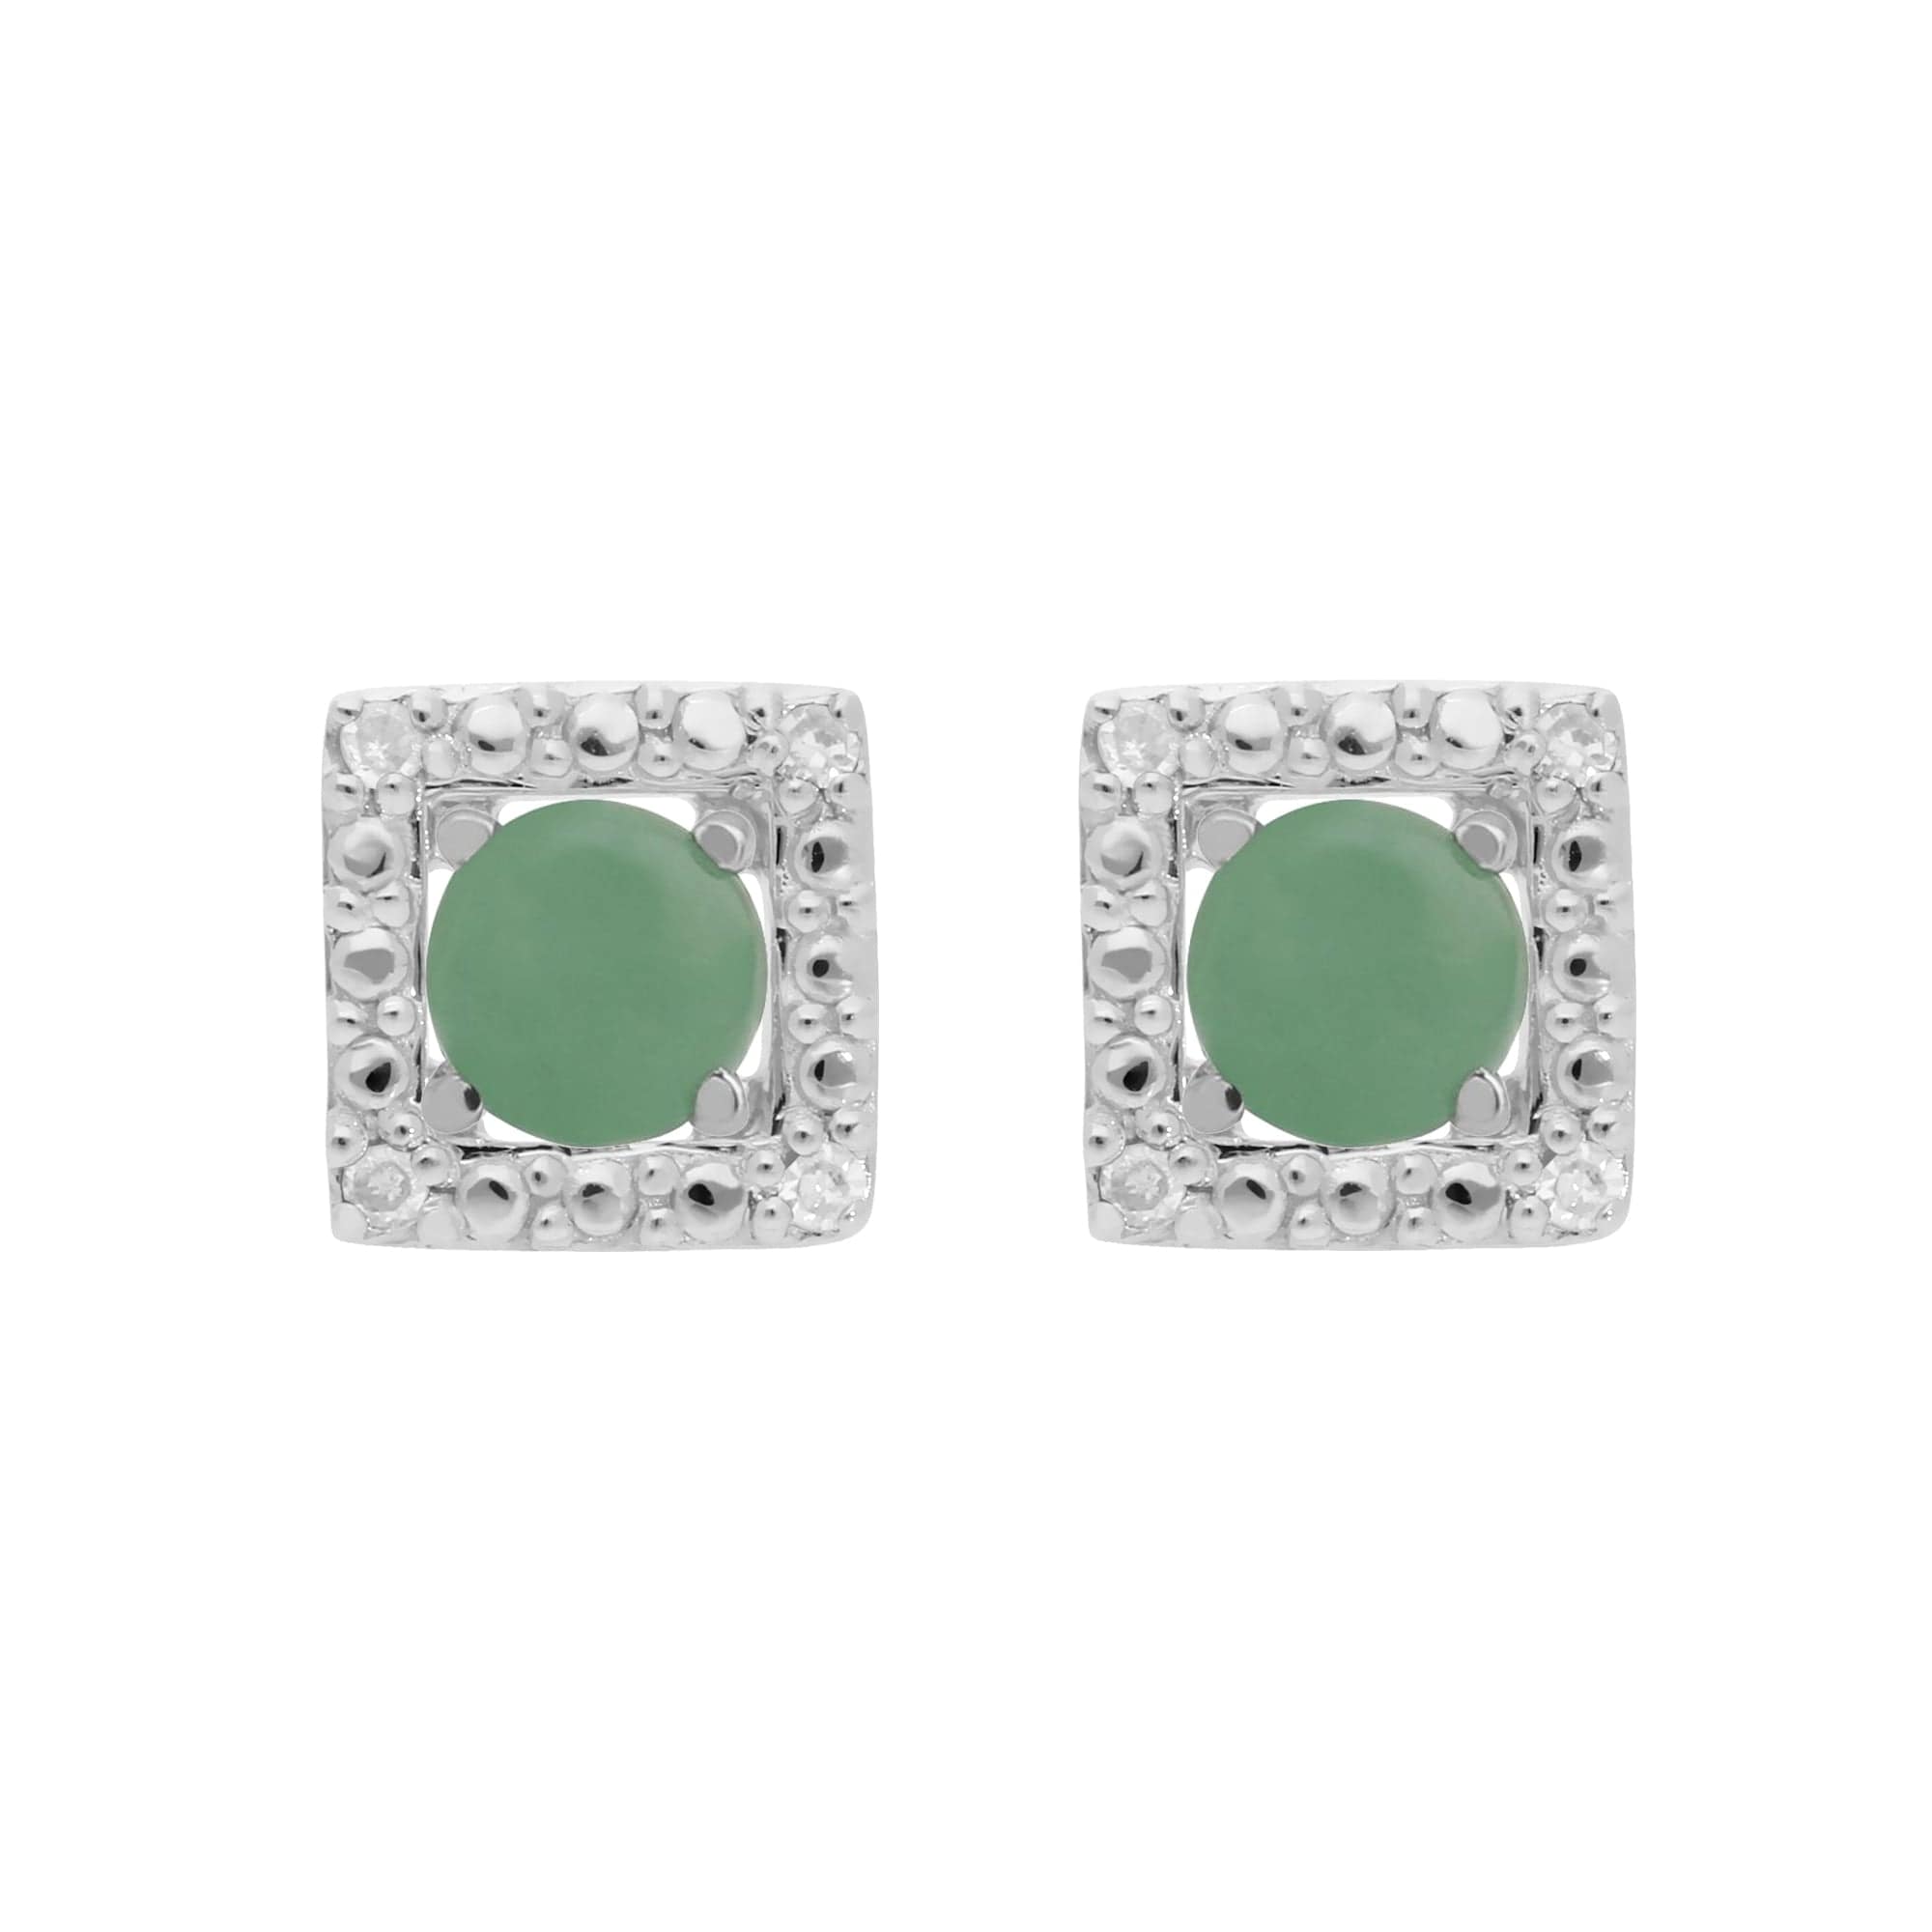 162E0071149-162E0245019 Classic Round Jade Stud Earrings with Detachable Diamond Square Ear Jacket in 9ct White Gold 1